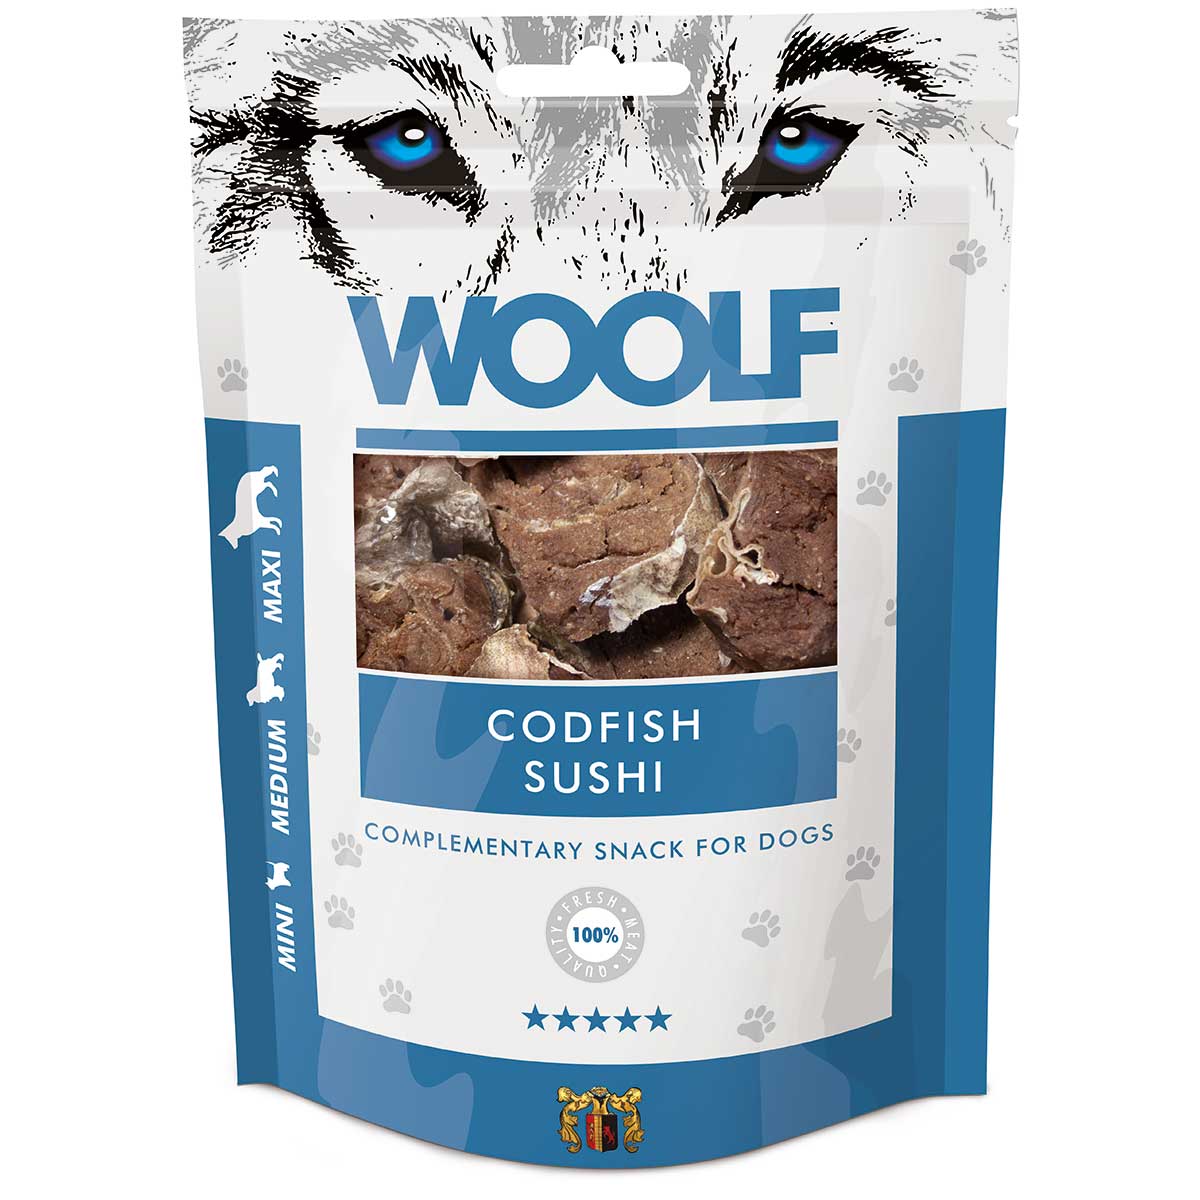 Woolf friandise pour chiens cabillaud sushi